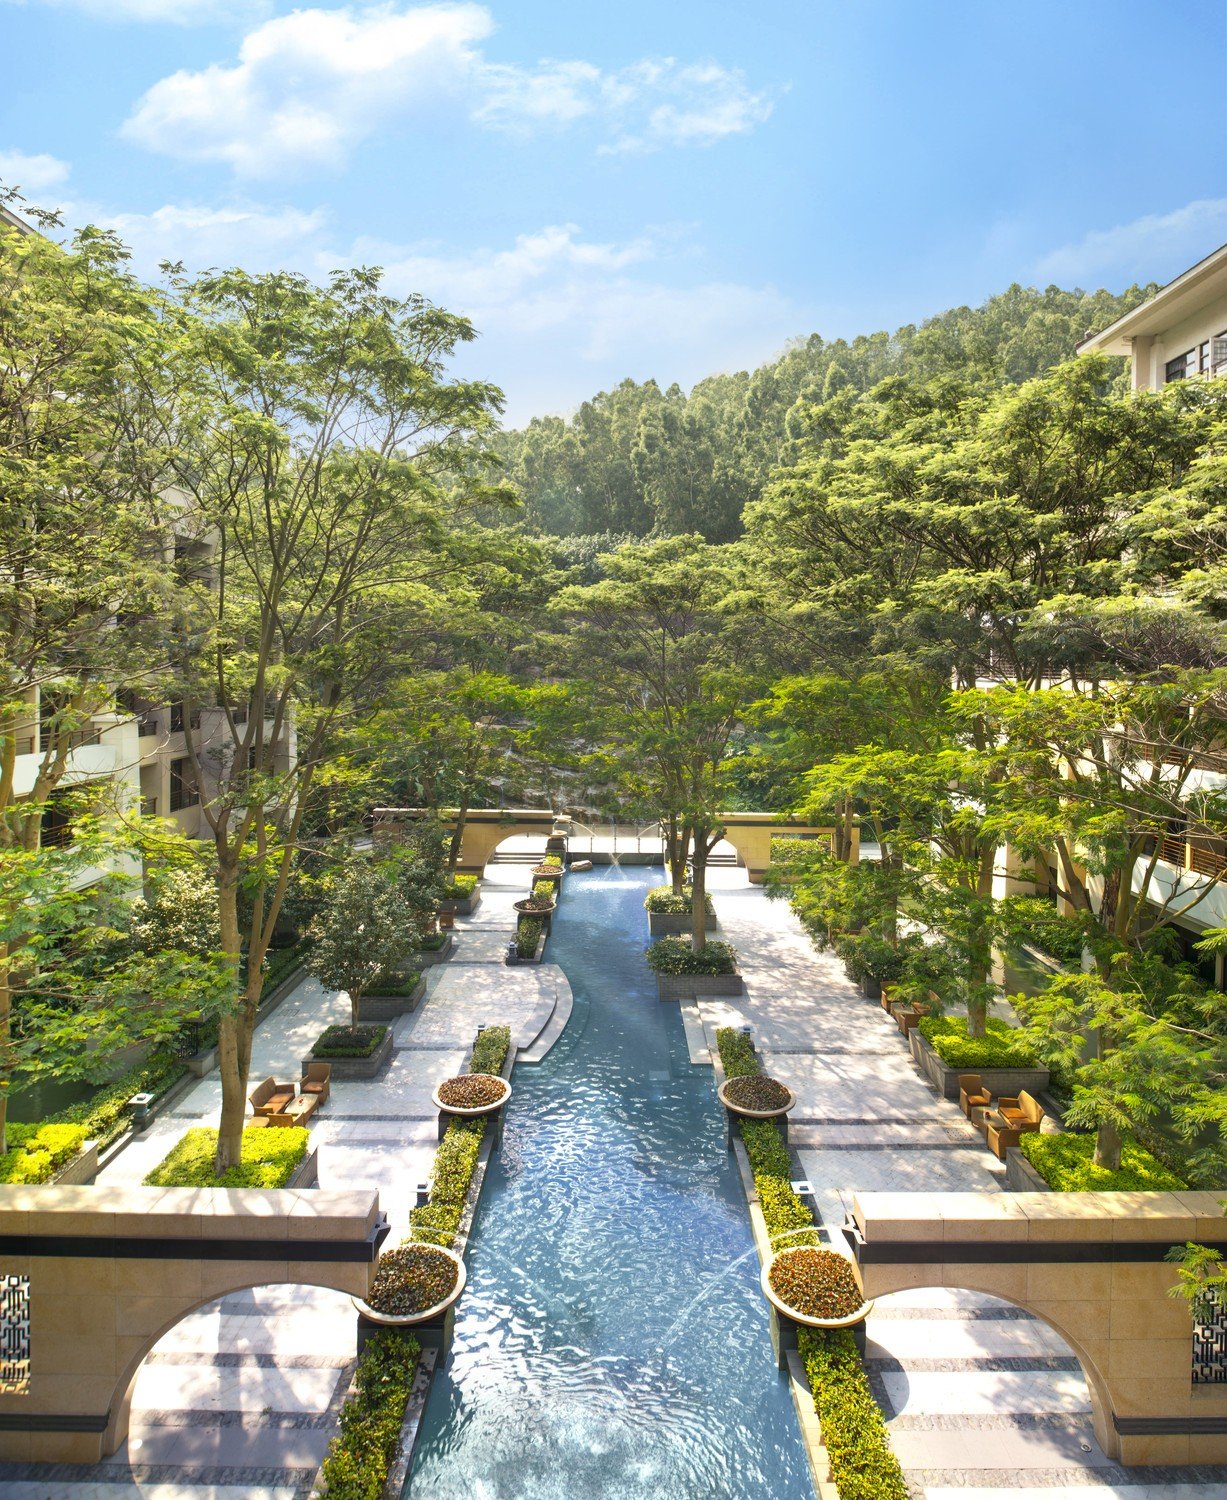 Le Meridien Xiamen offers an outdoor Chef’s Table and a ladies’ amenities programme.